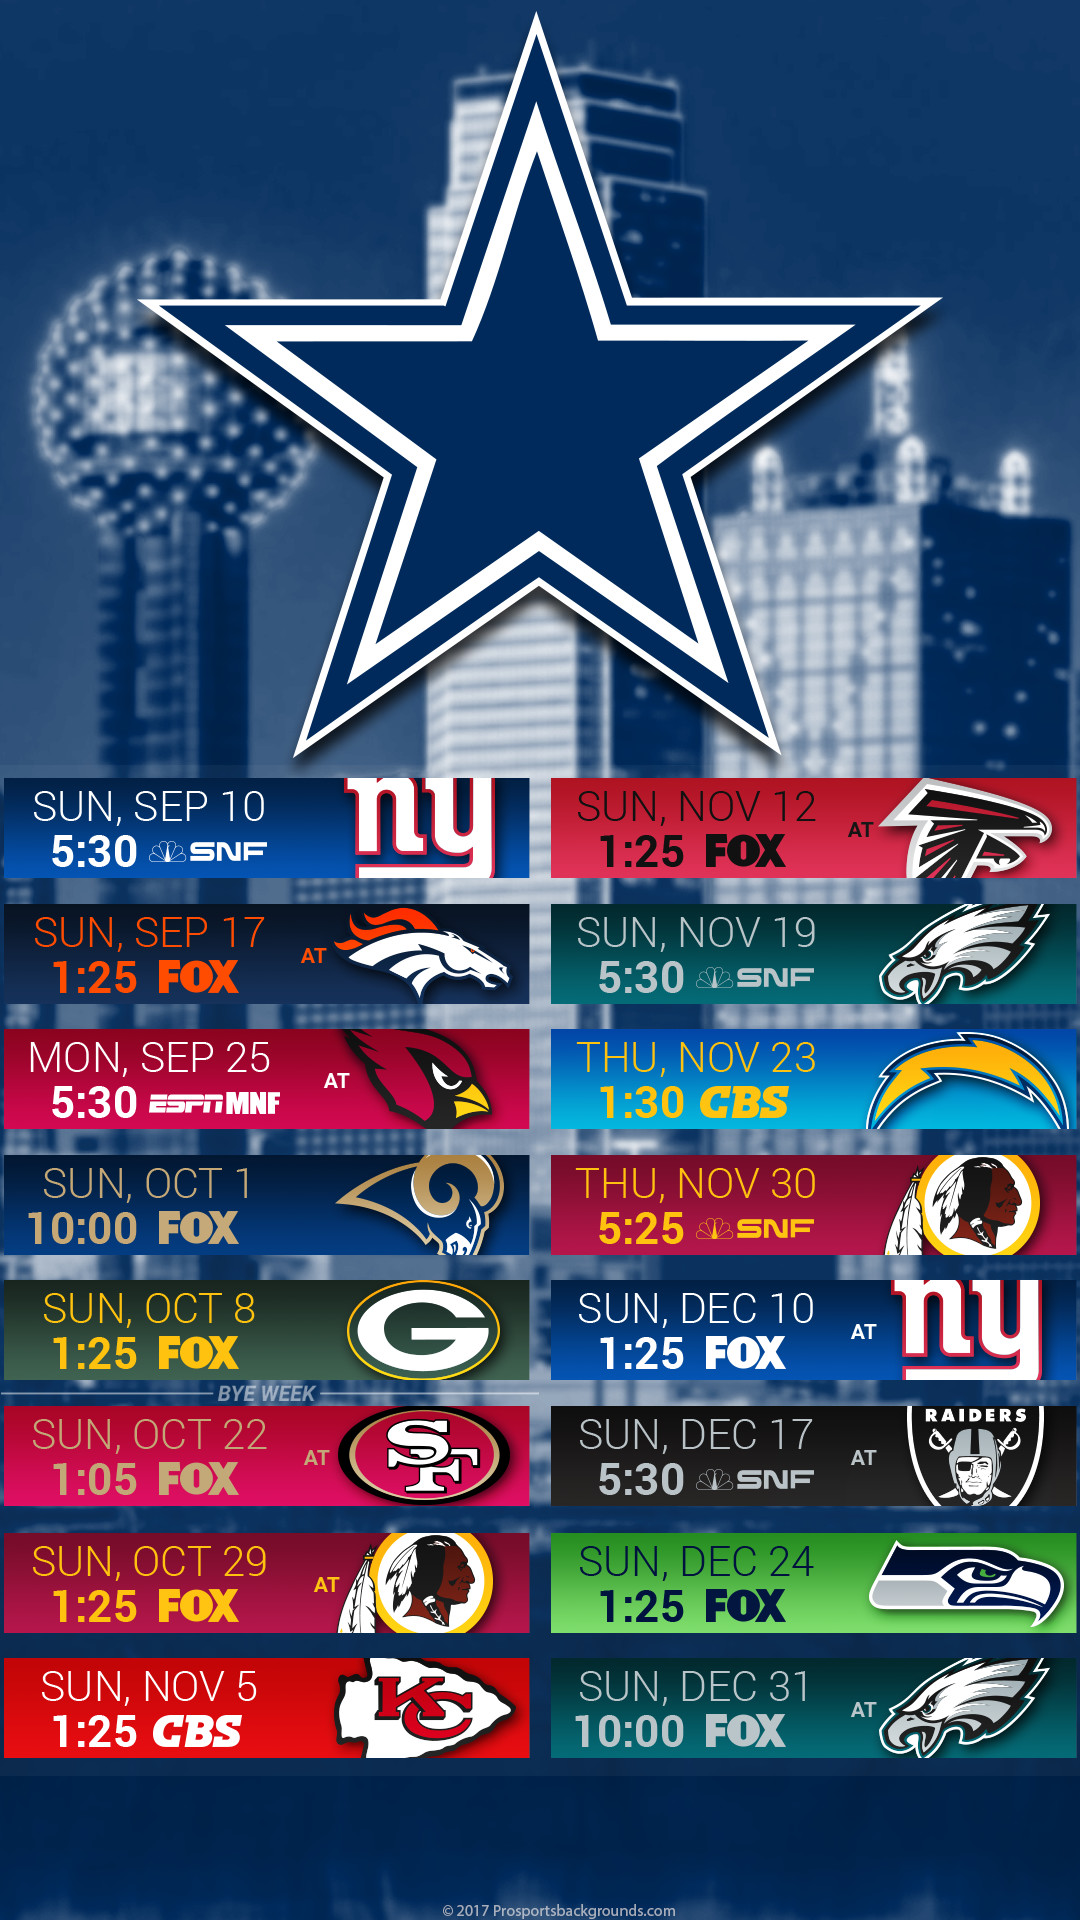 1080x1920 The Highest Quality Dallas Cowboys Football Schedule Wallpapers and Logo  Backgrounds for iPhone, Andriod, Galaxy, and Desktop PC.